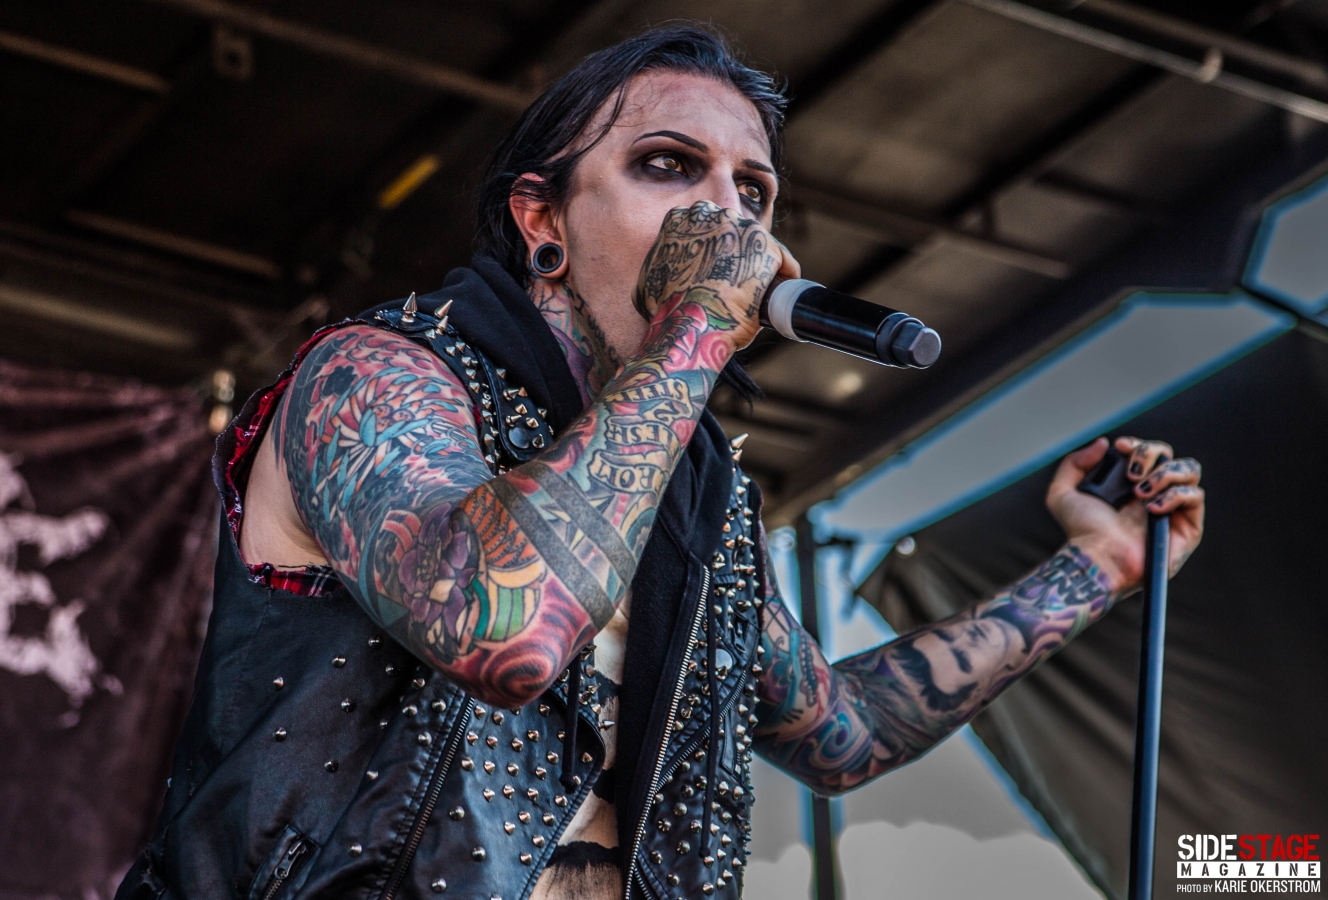 Motionless in White At Warped Tour 7/22/2016 - Side Stage Magazine1328 x 900